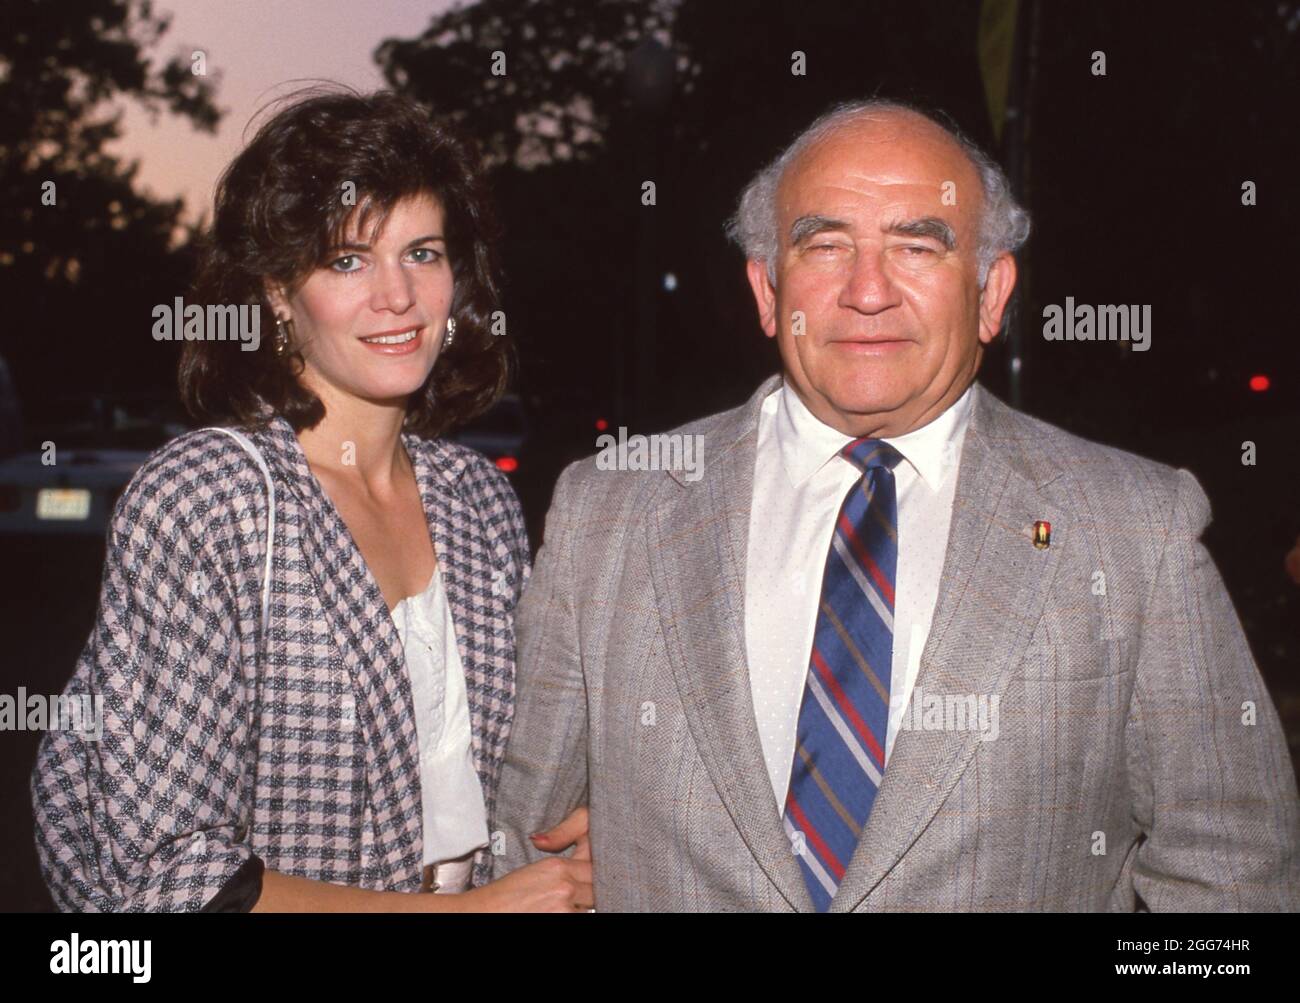 **FILE PHOTO** Ed Asner Has Passed Away. LOS ANGELES, CA - AUGUST 26: Actor Ed Asner and Gwen Seliger attend fundraiser for Michael Dukakis on August 26, 1987 at Sally Field's home in Los Angeles, California. Credit: Ralph Dominguez/MediaPunch Stock Photo